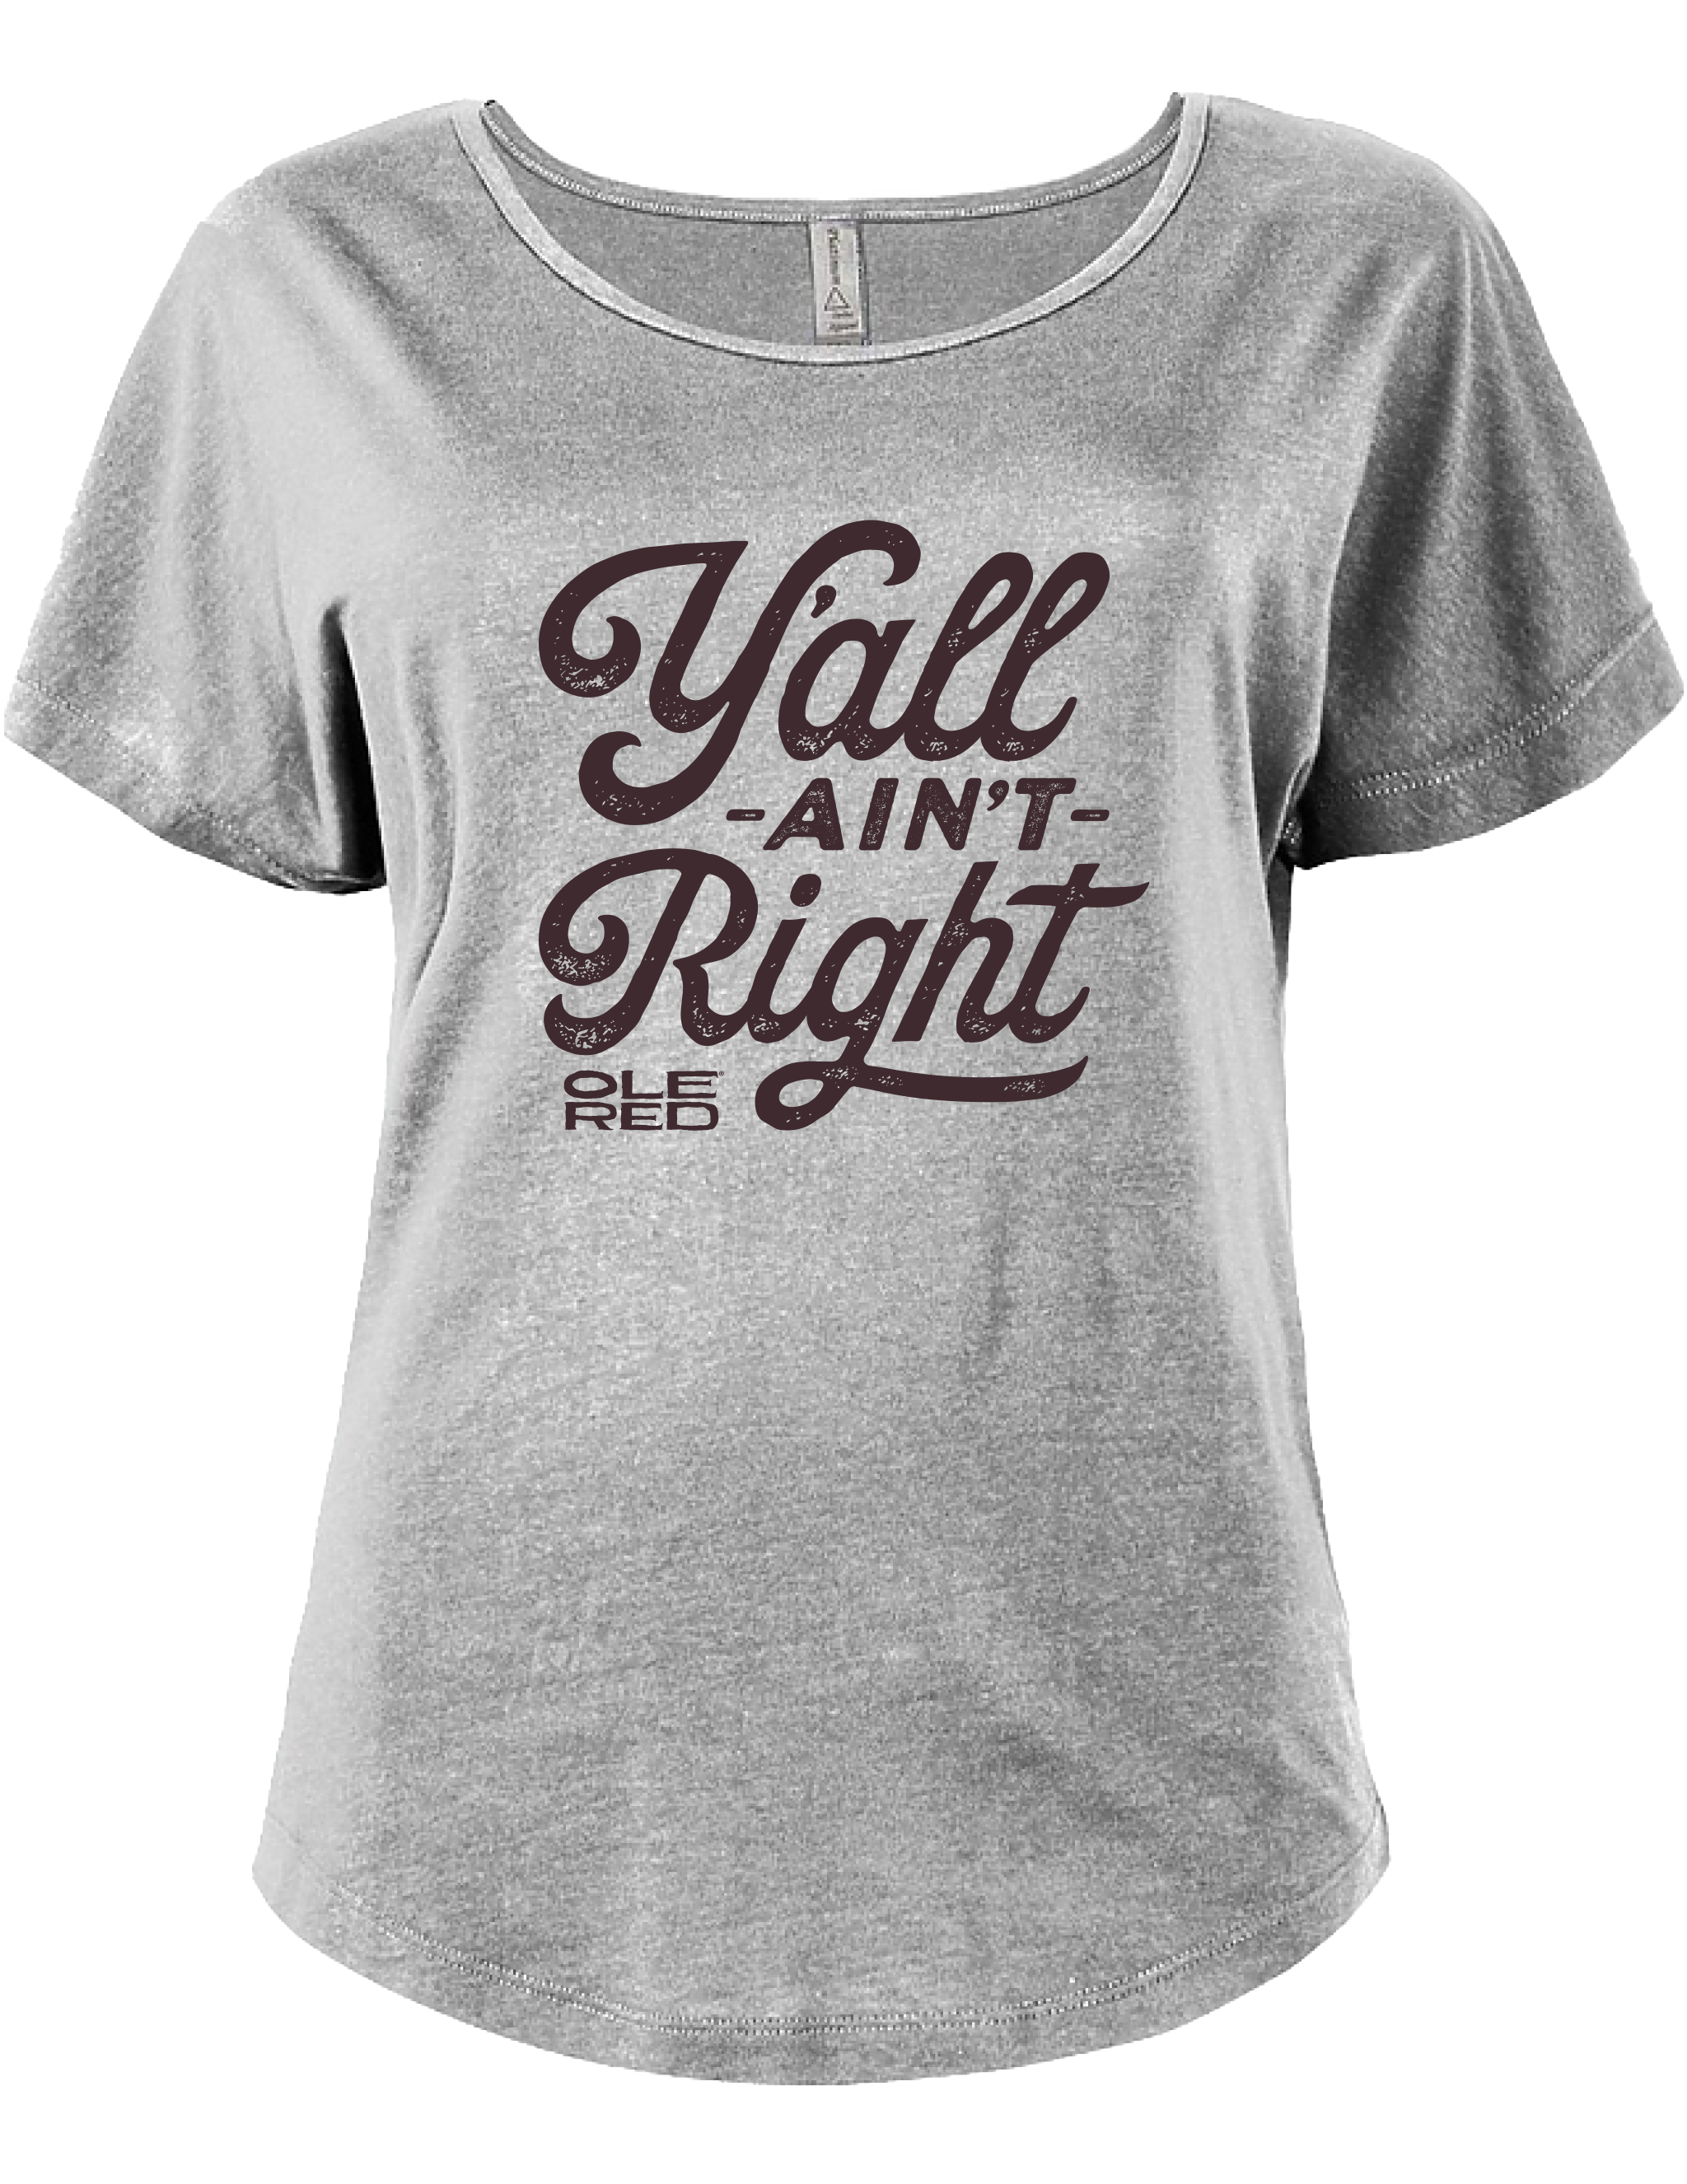 Ole Red Y'all Ain't Right Women's T-Shirt